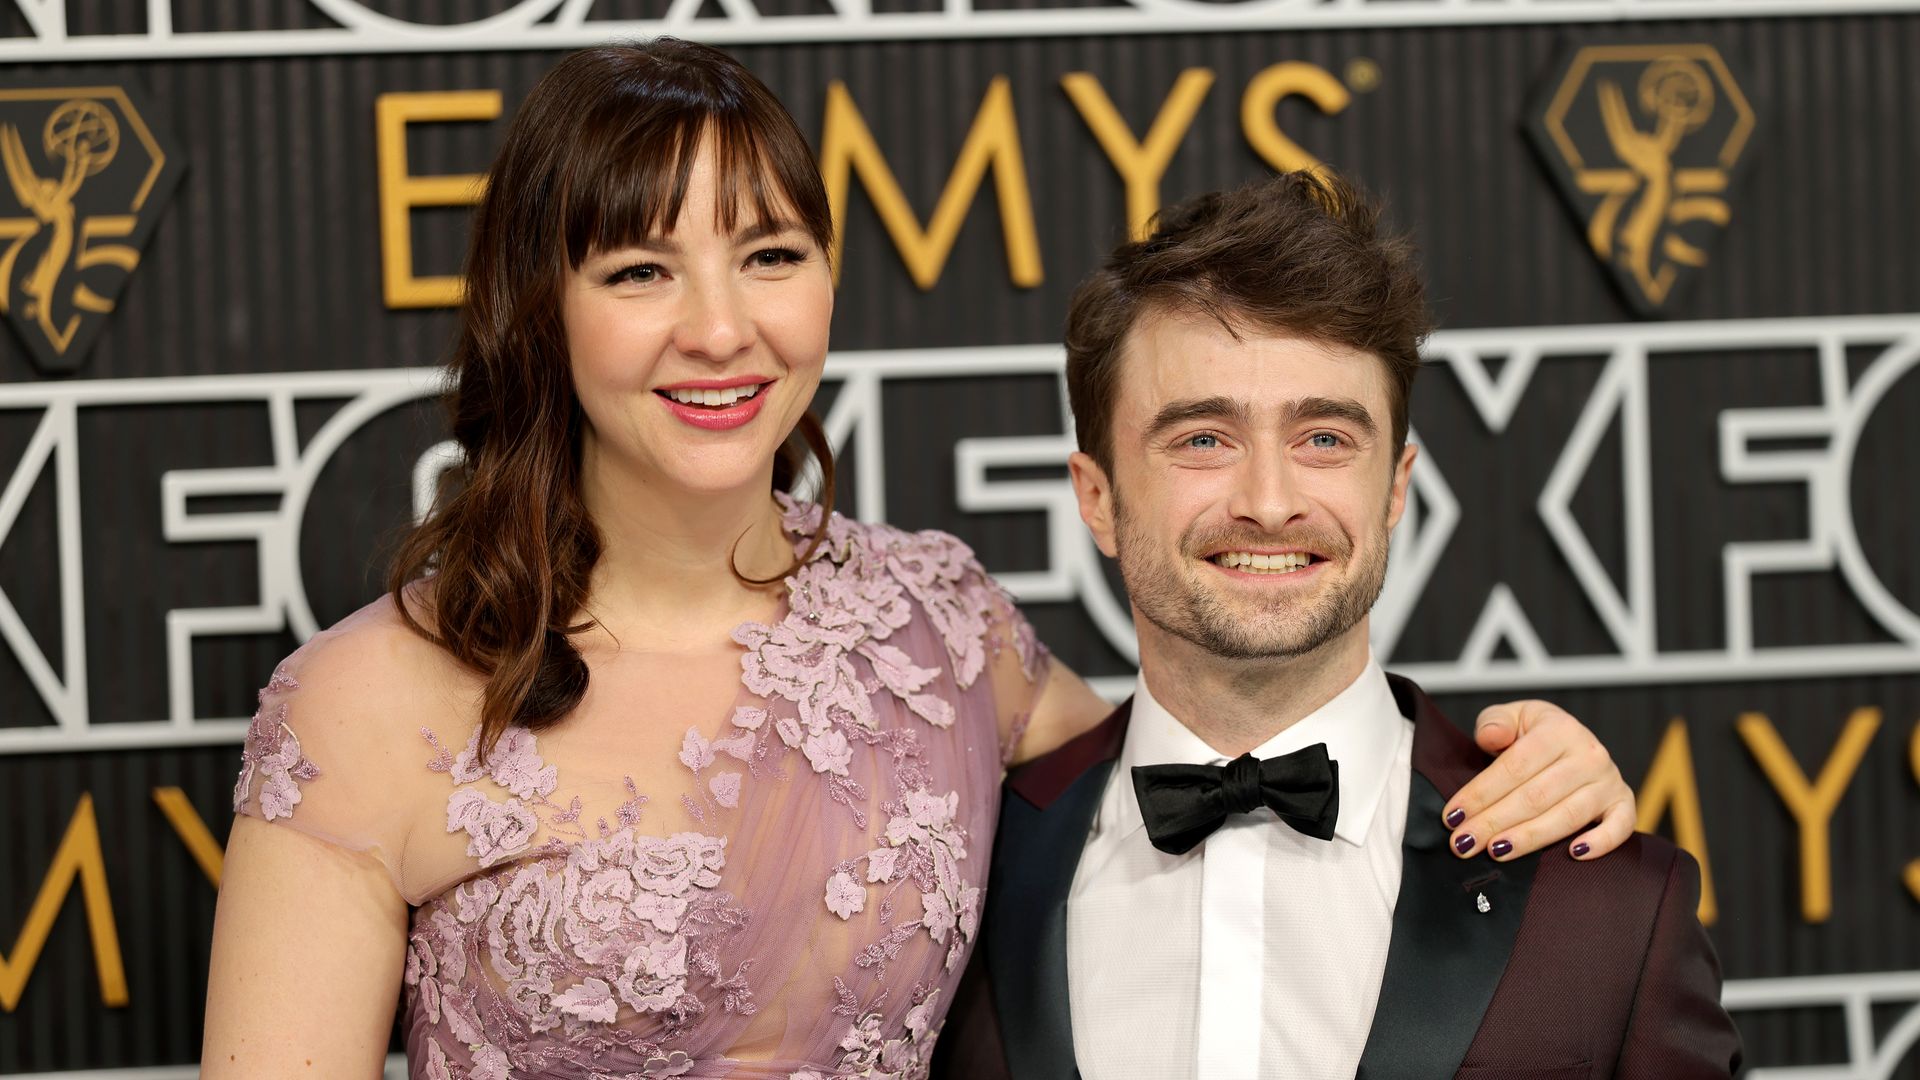 Daniel Radcliffe breaks silence about Erin Darke marriage reports after welcoming first child